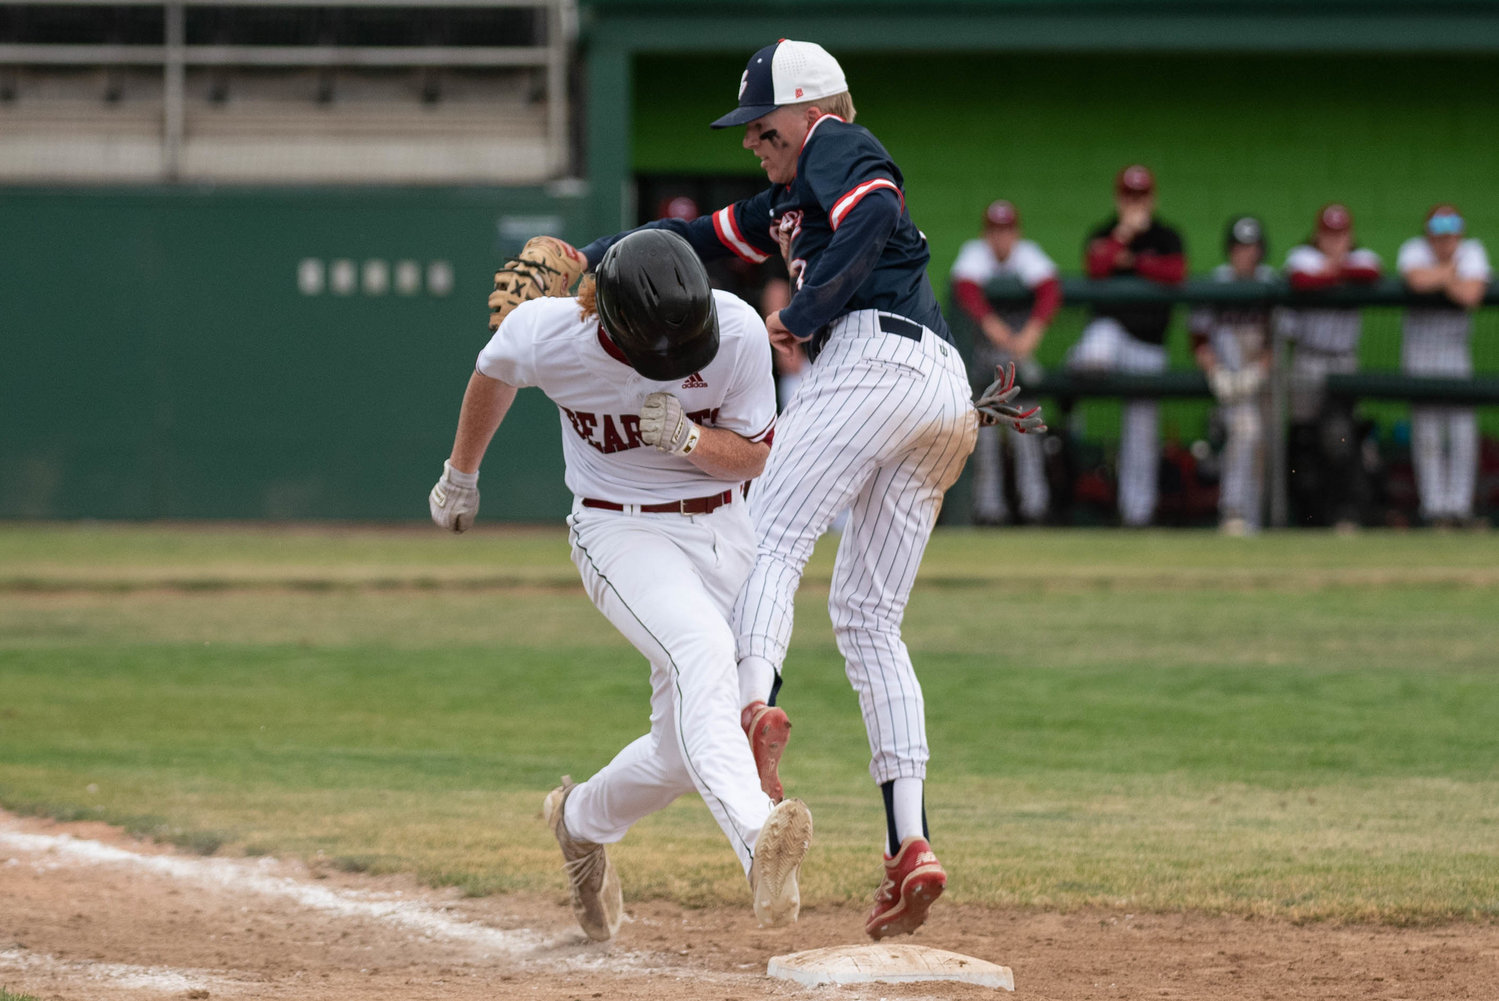 W.F. West outfielder Logan Moore stretches for first base while Ellensburg's Johnny Rominger tries to tag him out in the 2A State Baseball Third-Place Game at Yakima County Stadium May 28.